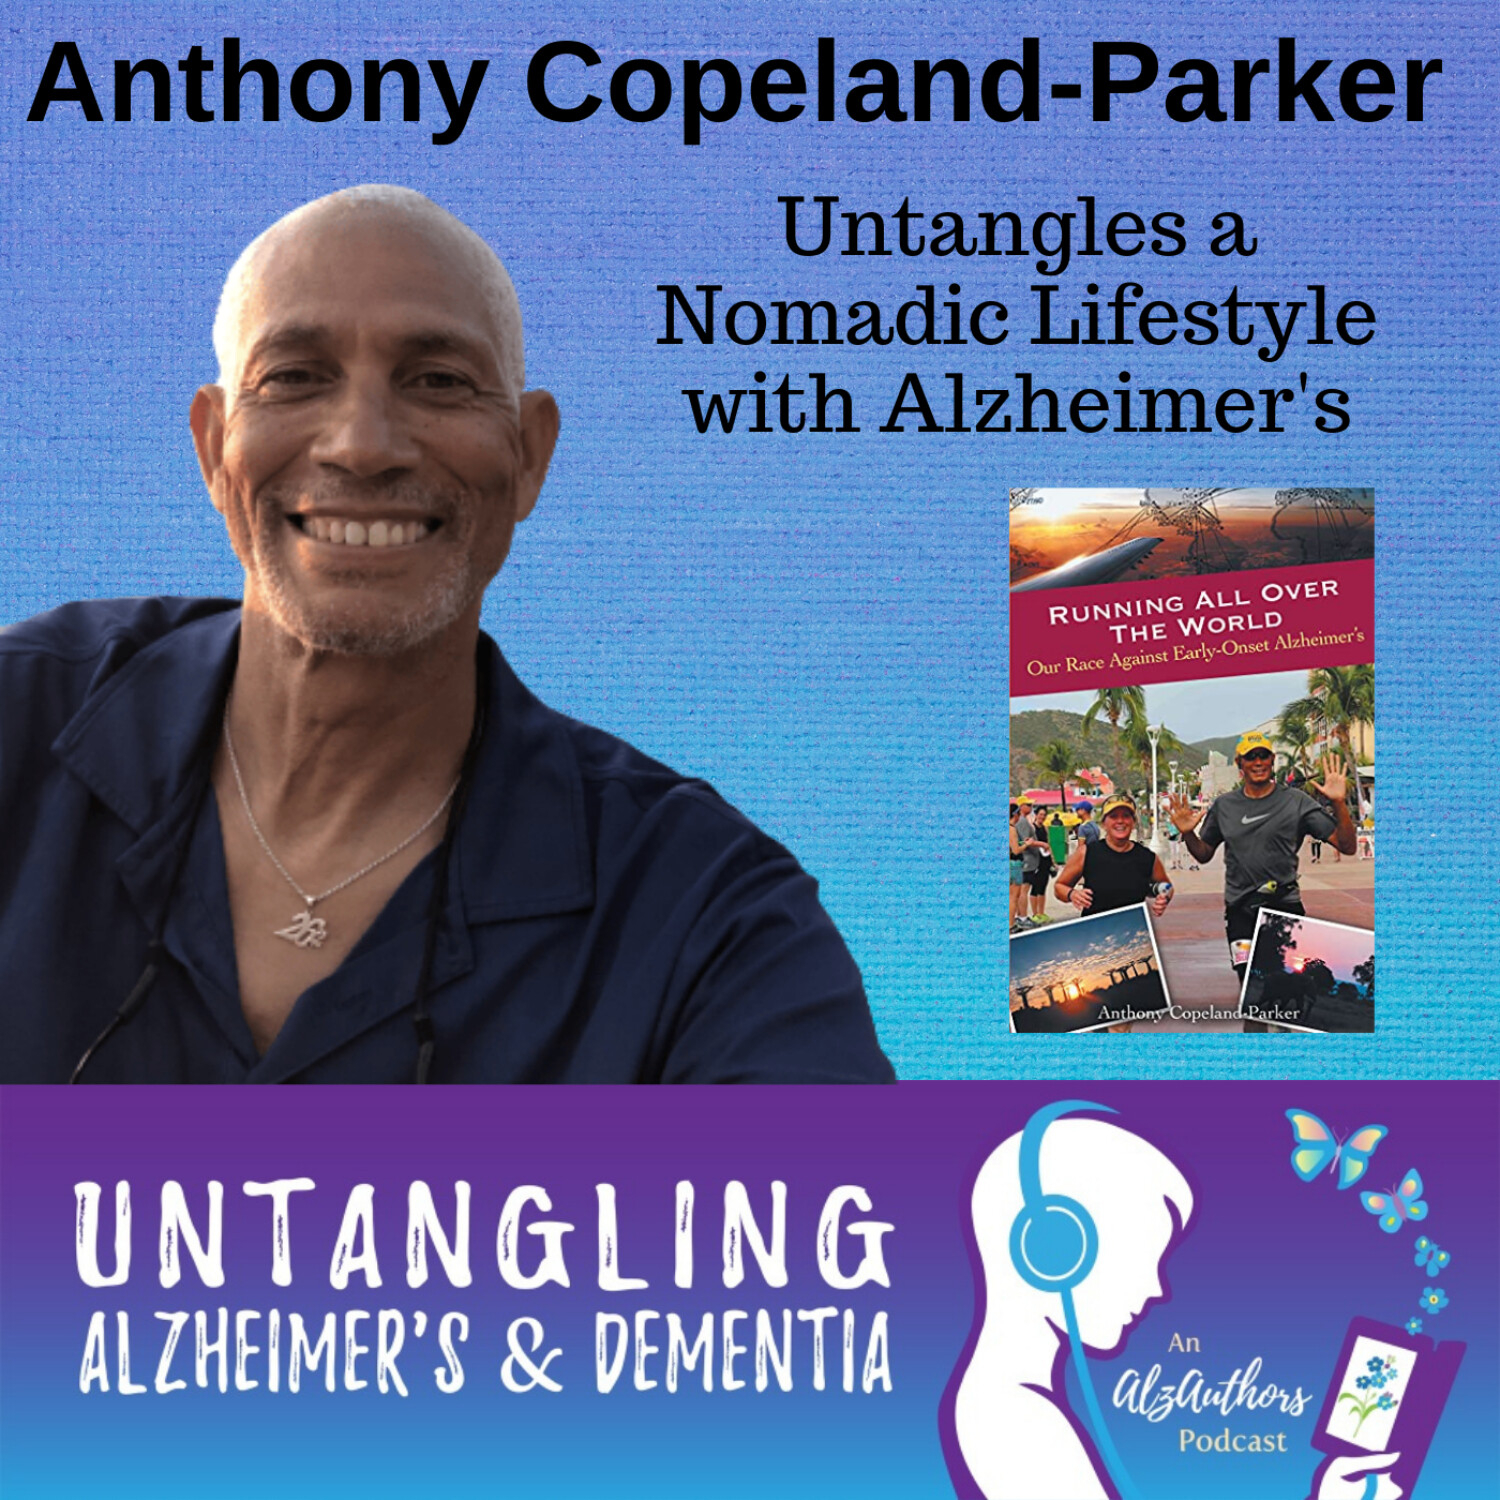 Anthony Copeland-Parker Untangles Life as a Nomad and Early Onset Alzheimer's